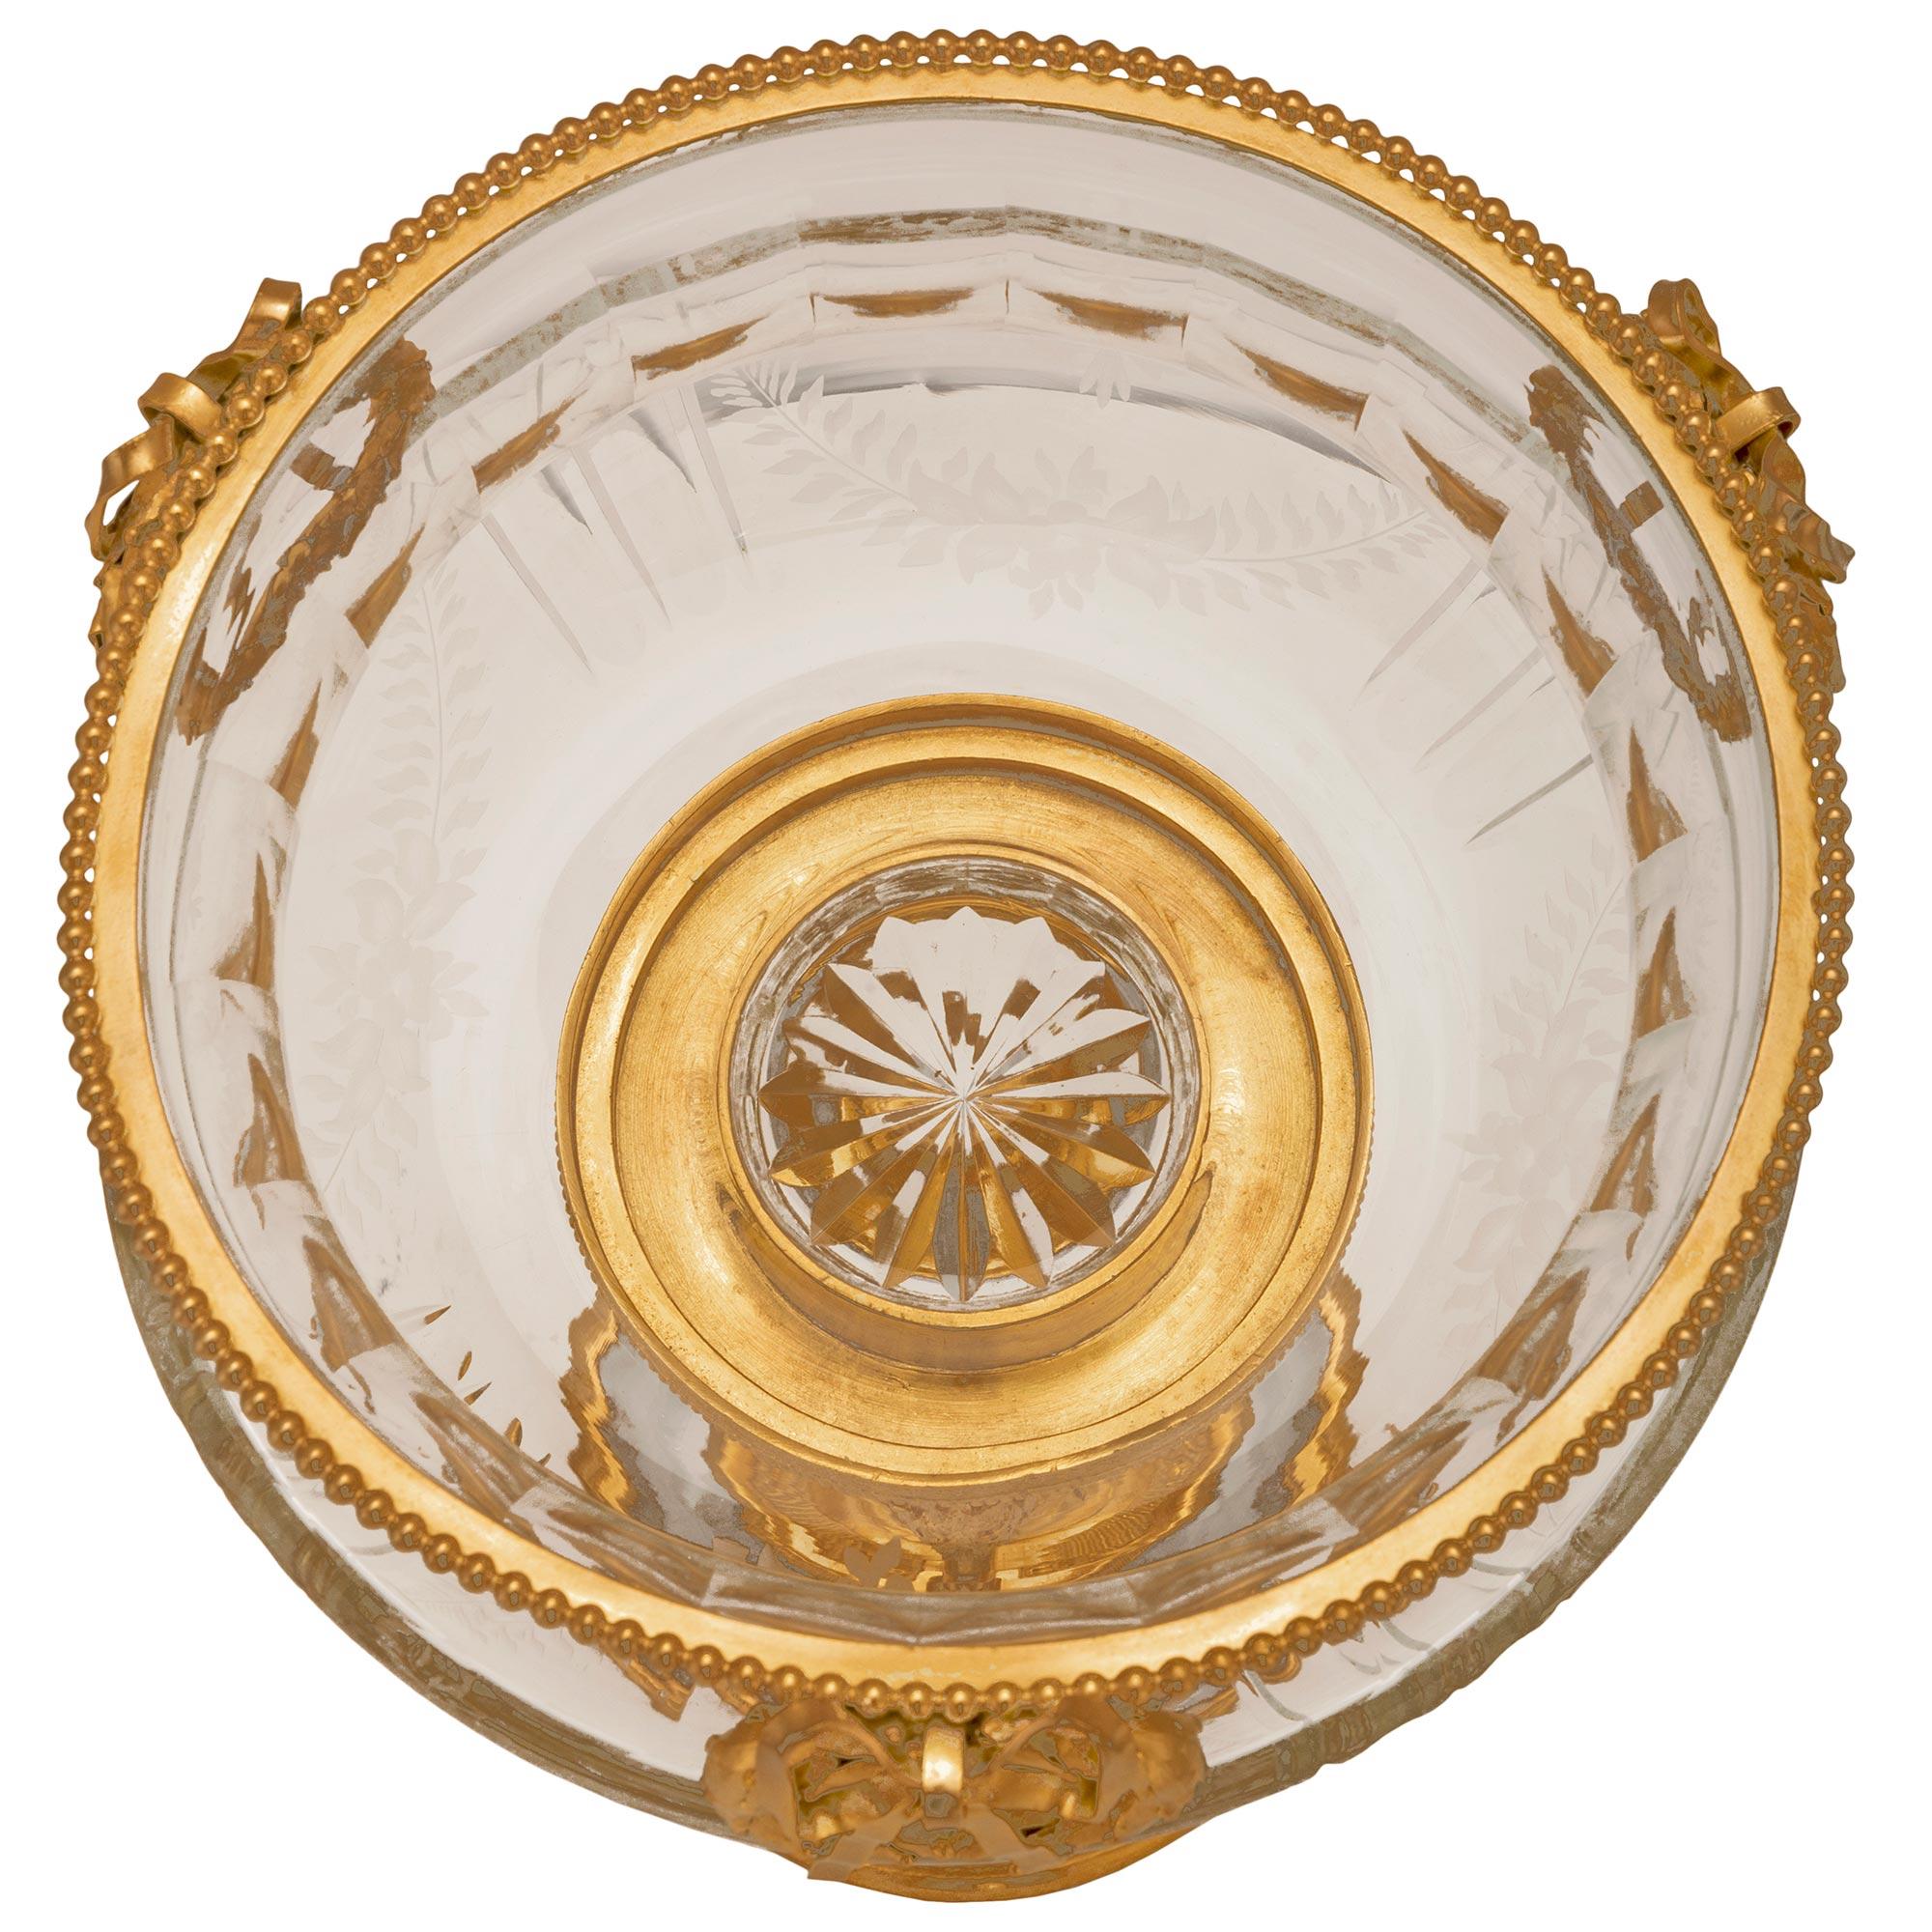 A beautiful and most elegant French 19th century Louis XVI st. Baccarat crystal and ormolu centerpiece. The centerpiece is raised by a circular base with lovely stepped mottled ormolu bands with Coeur de Rai, mottled, and beaded designs. Three